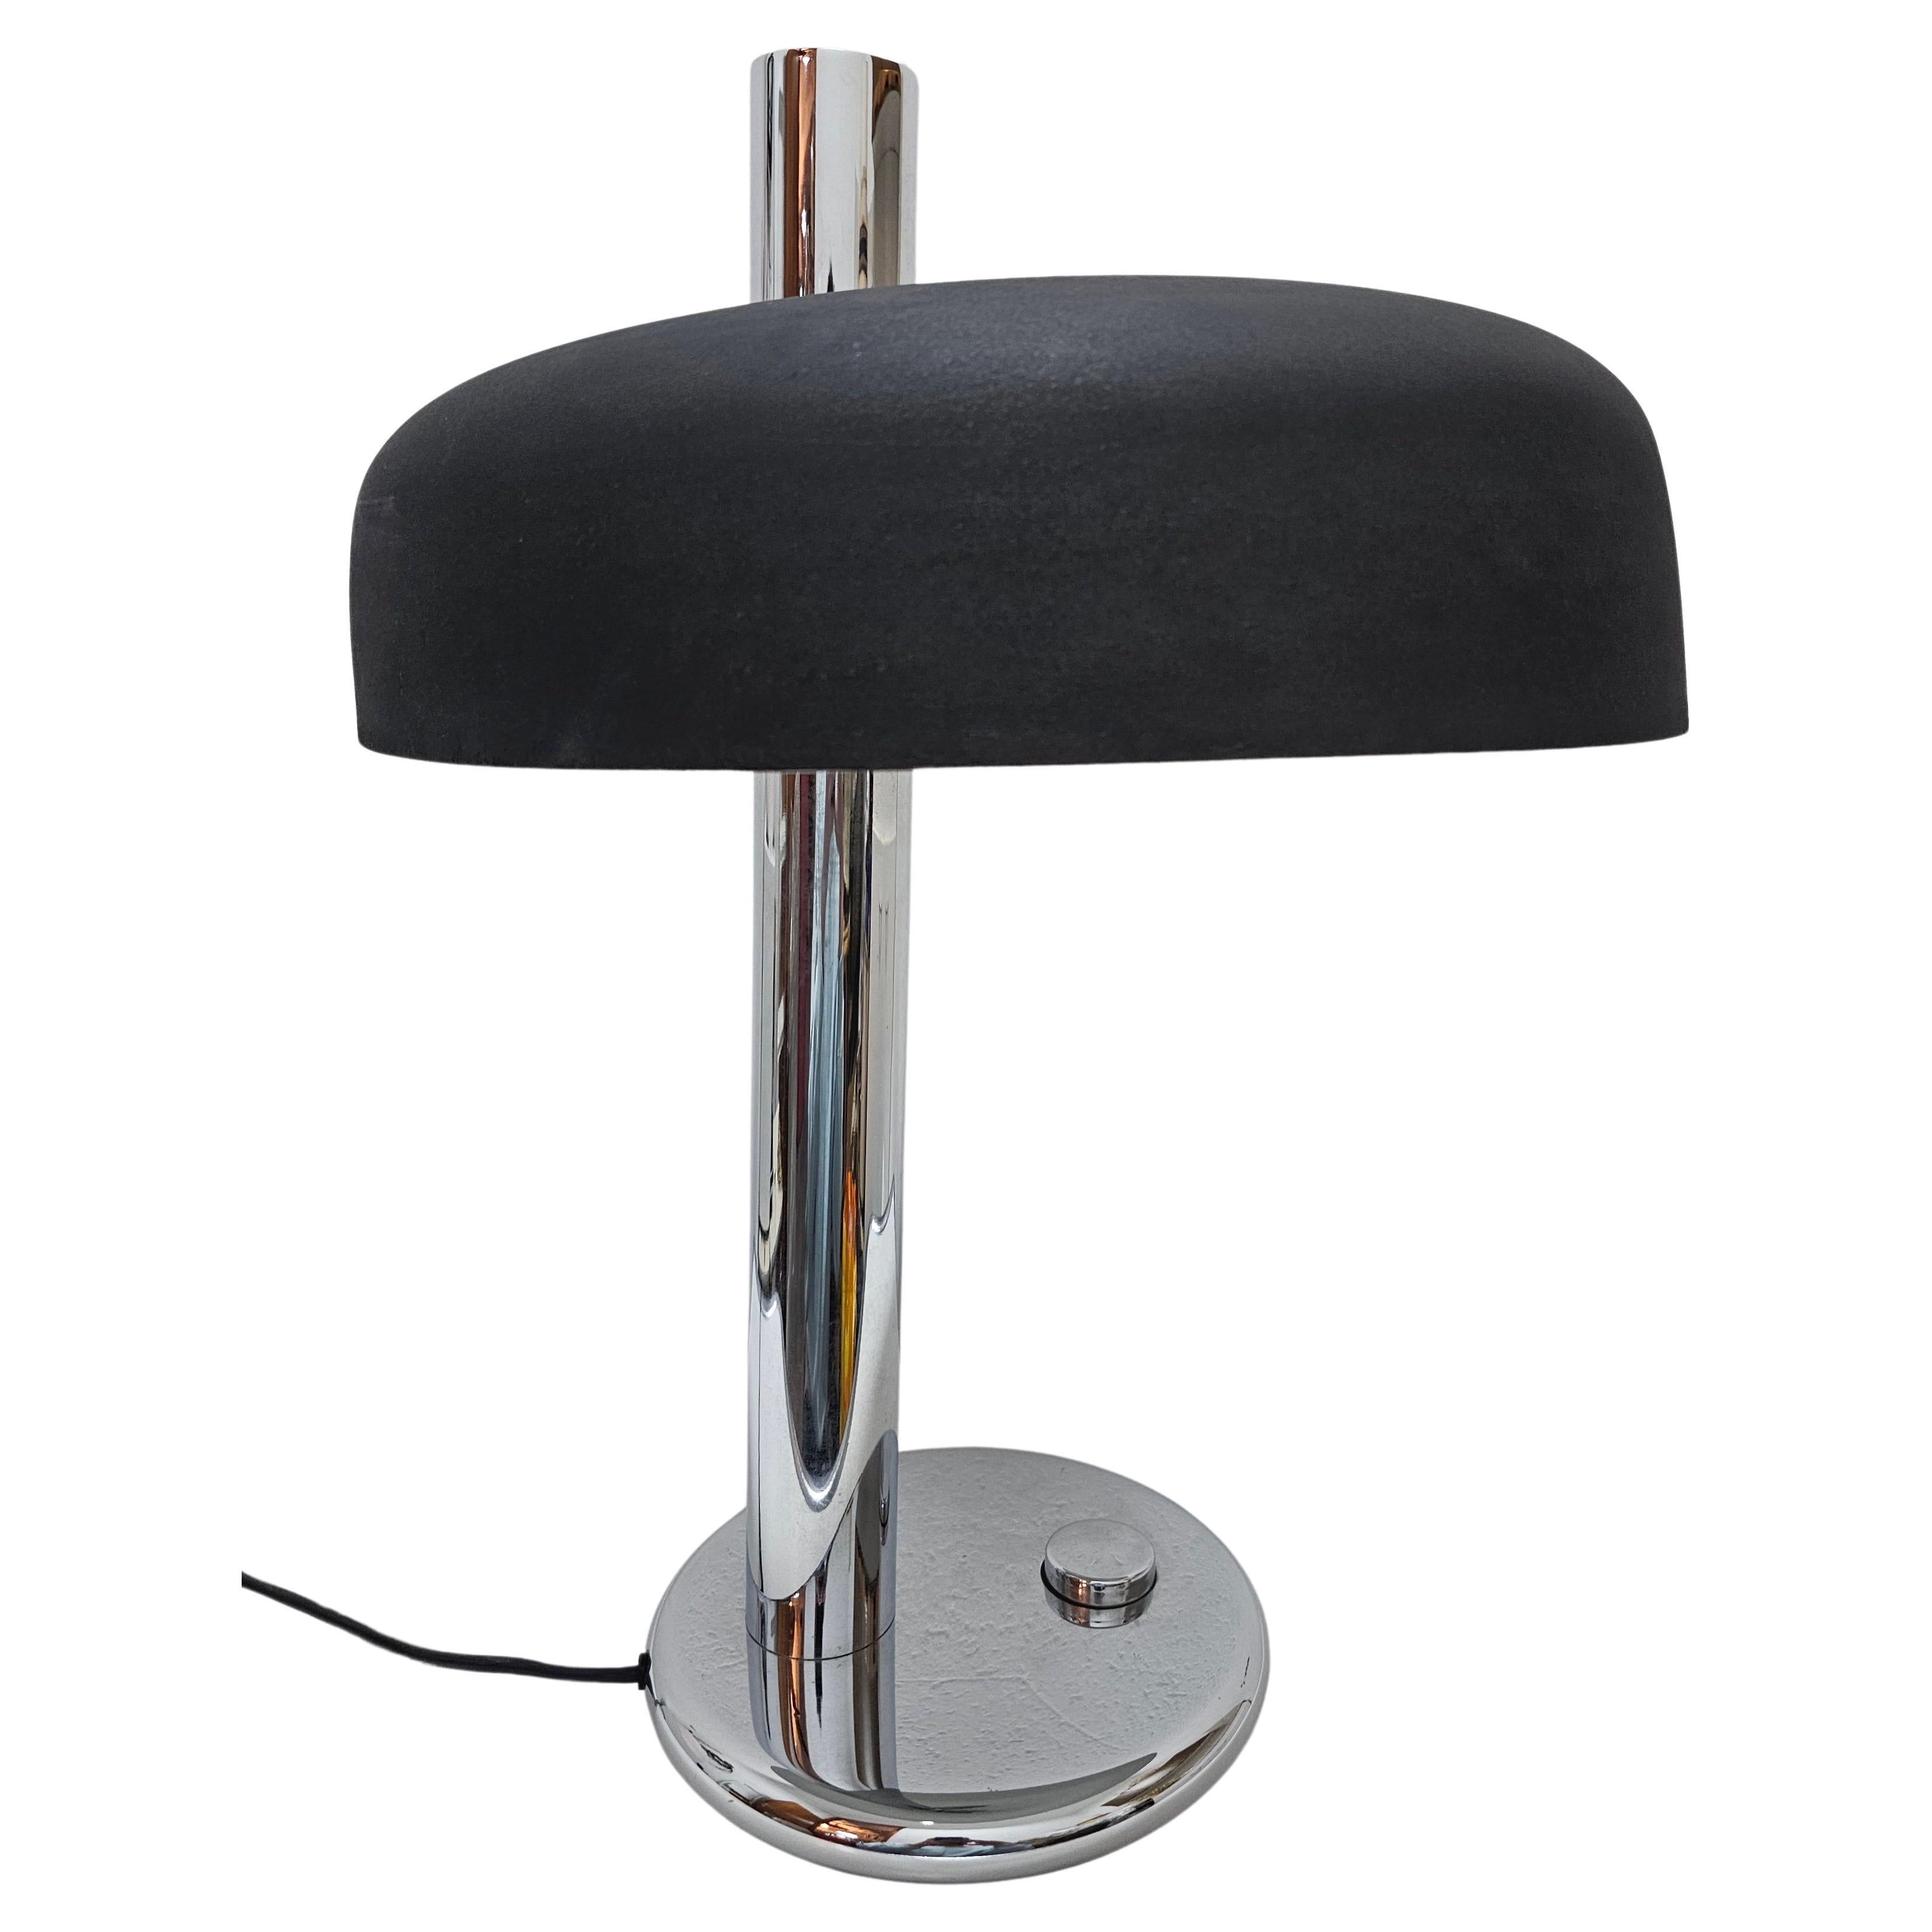 Bauhaus Style Table Lamp Model 7603 designed by Heinz Pfaender for Hillebrand  For Sale